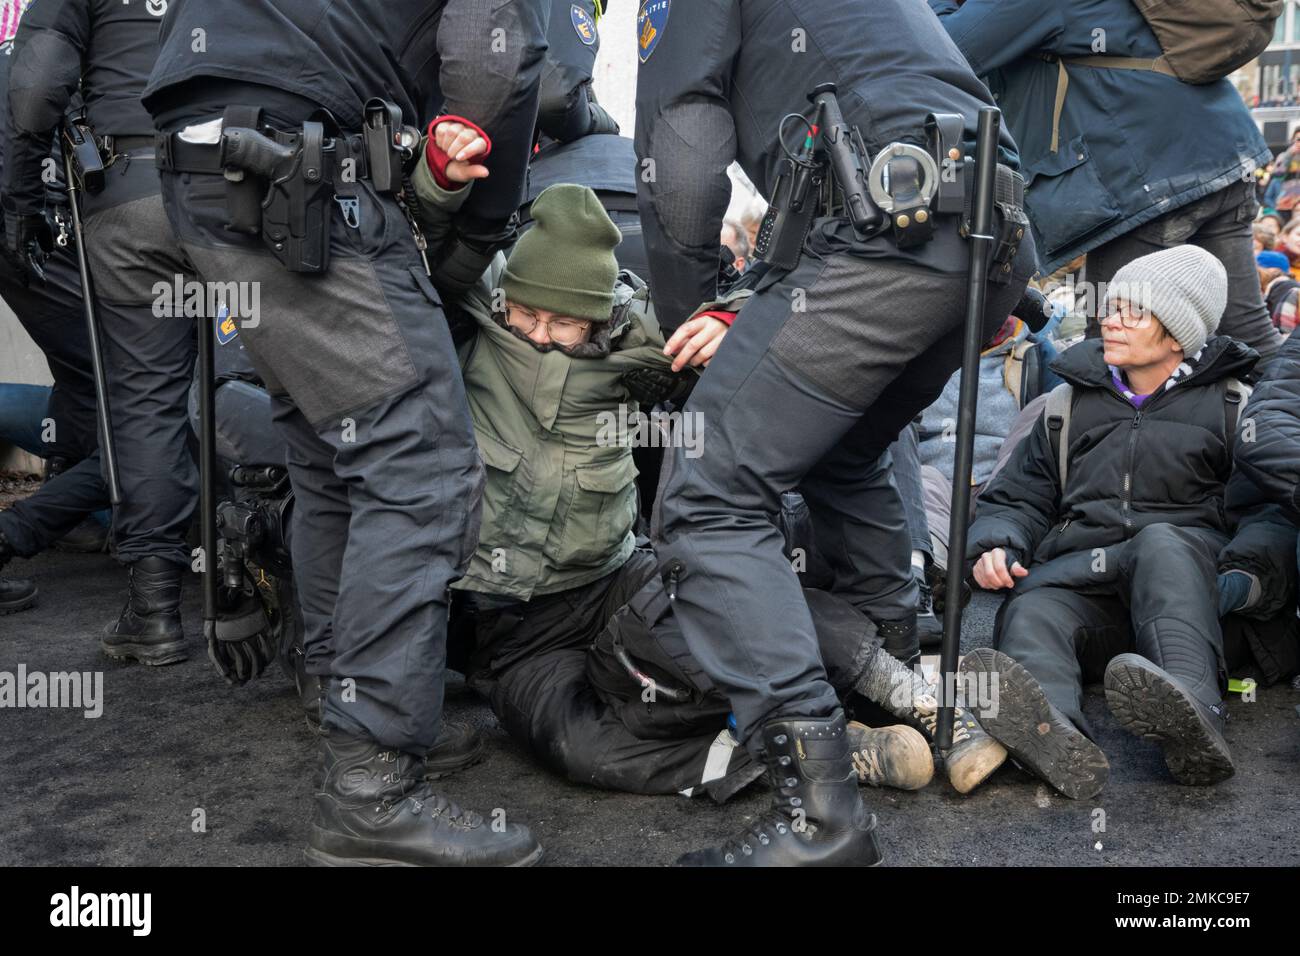 01-28-2023.The Hague,The Netherlands.Extinction Rebellion protested the usage and subsidy of fossile fuels by blocking the A12 highway.Hundreds of climate activists were arrested Stock Photo